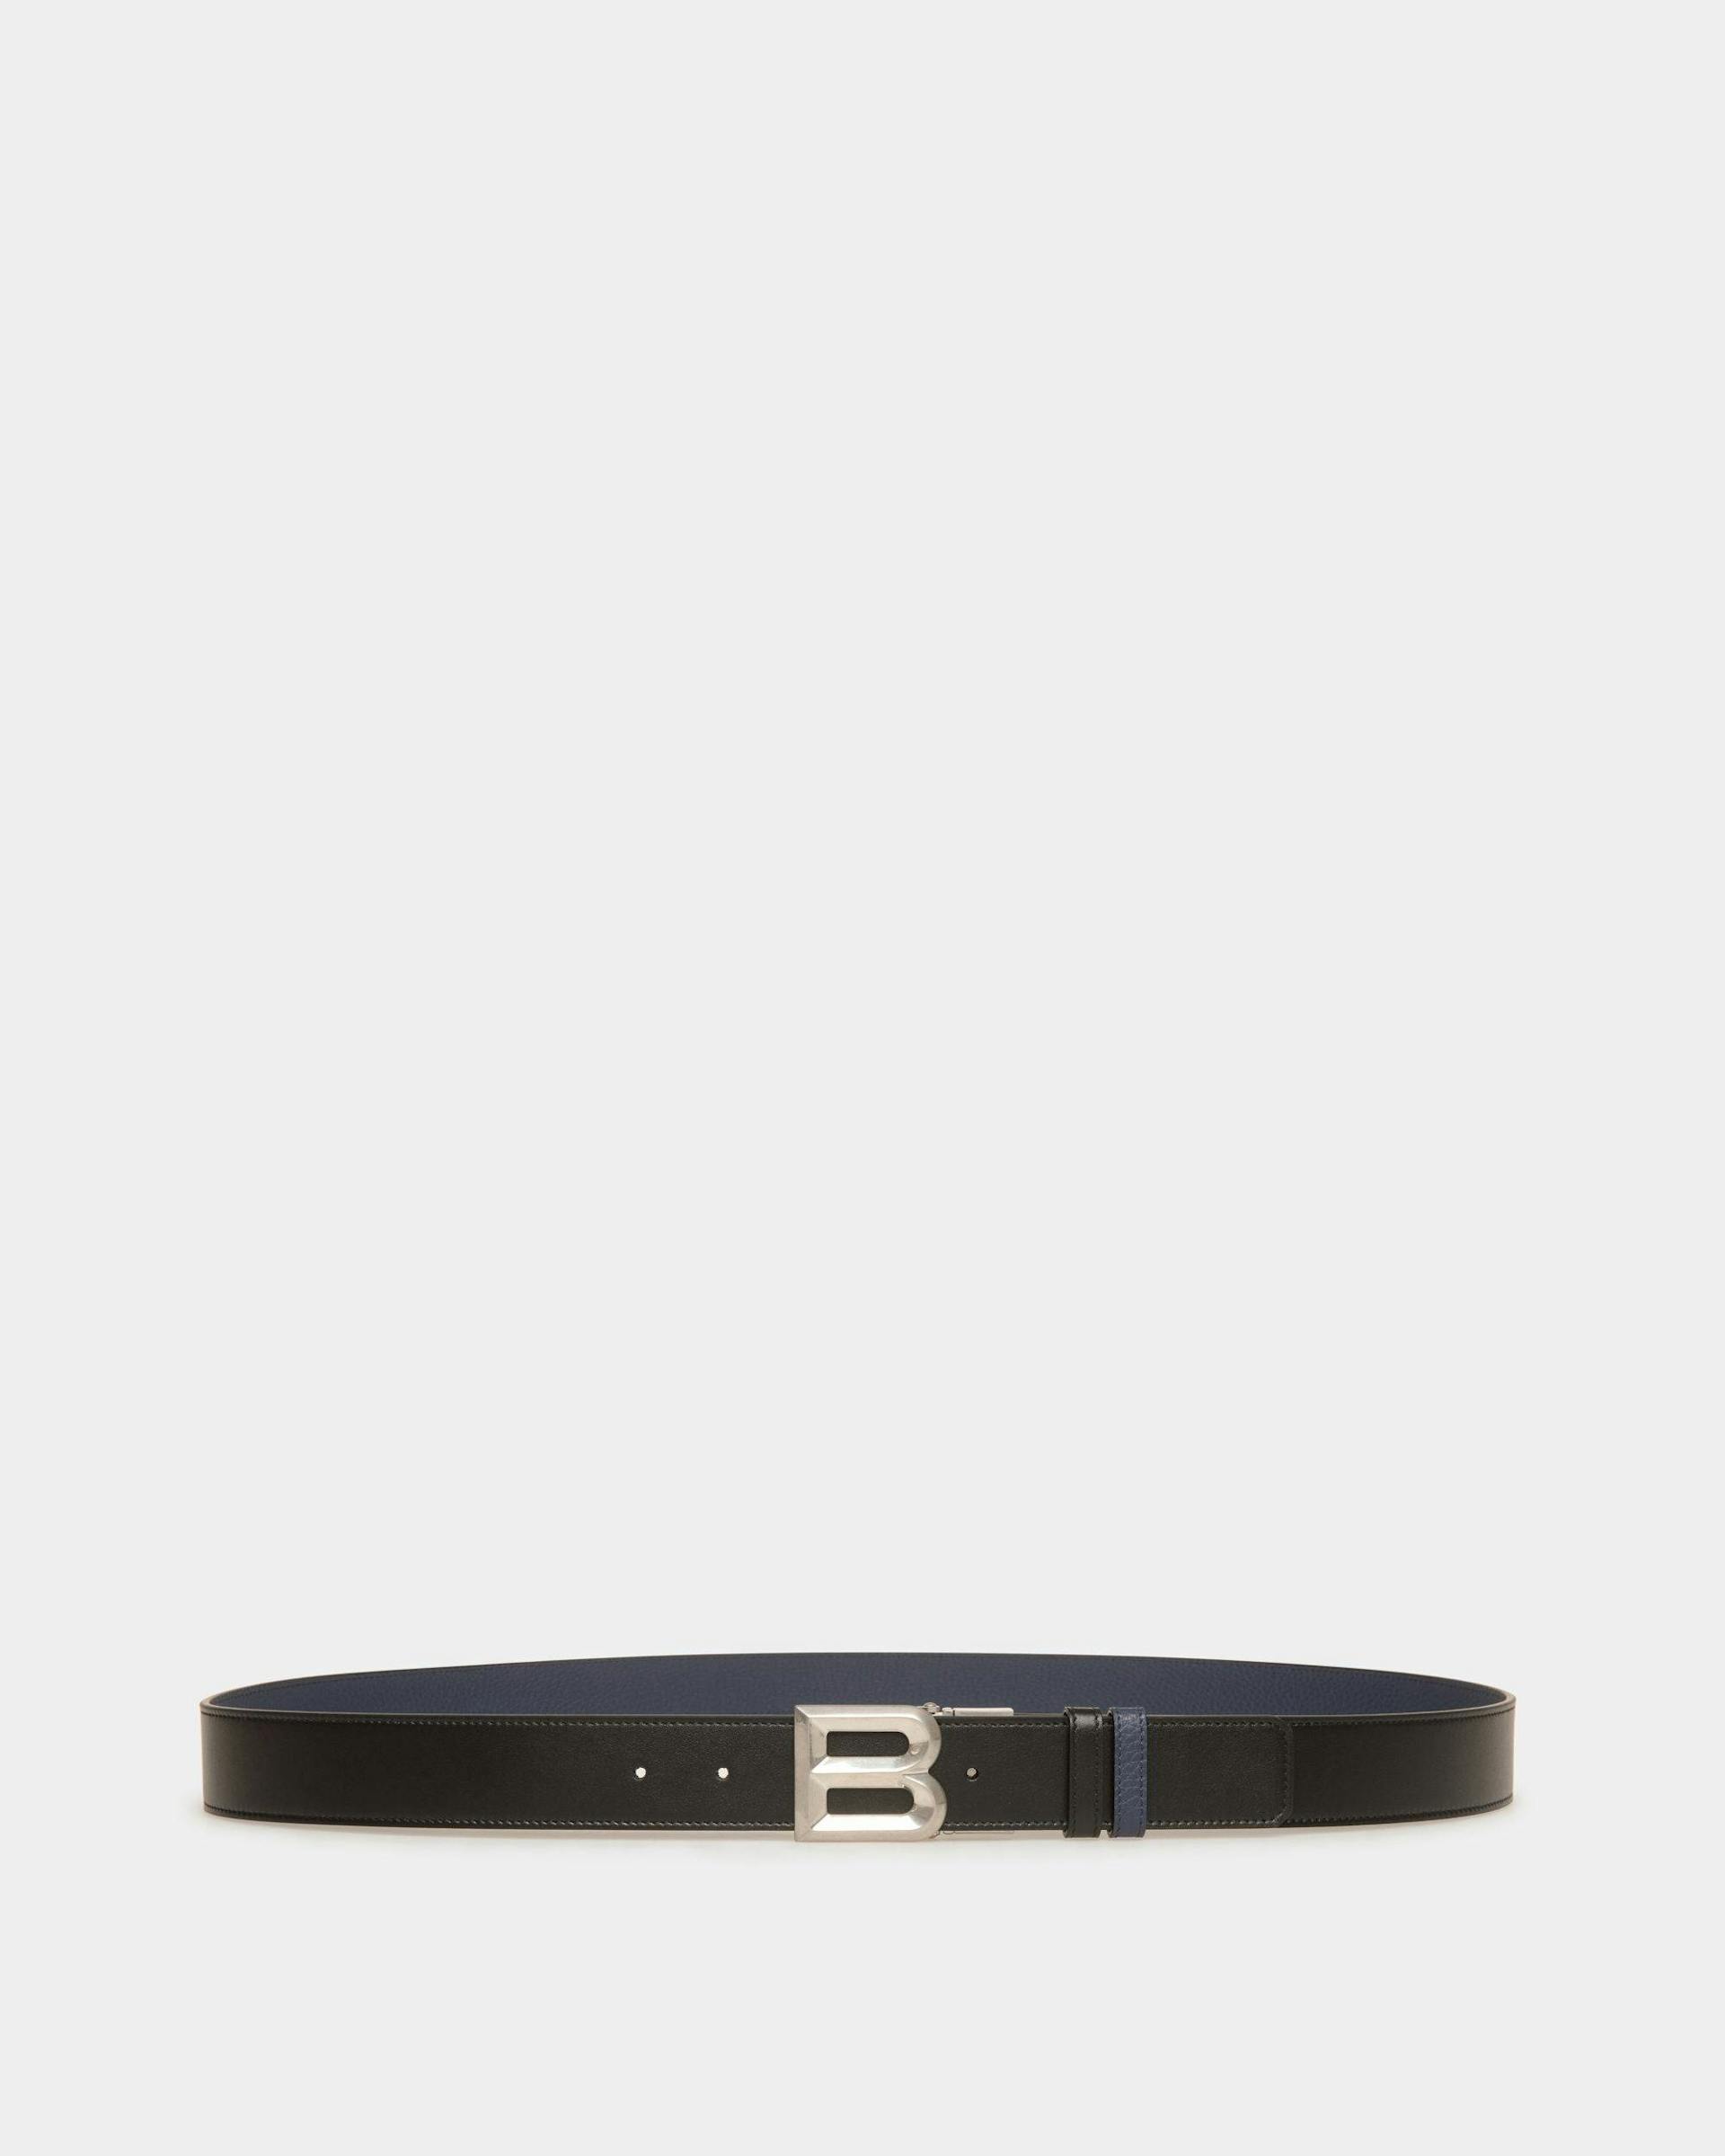 Men's B Bold 35Mm Reversible And Adjustable Belt In Black And Marine Leather | Bally | Still Life Front